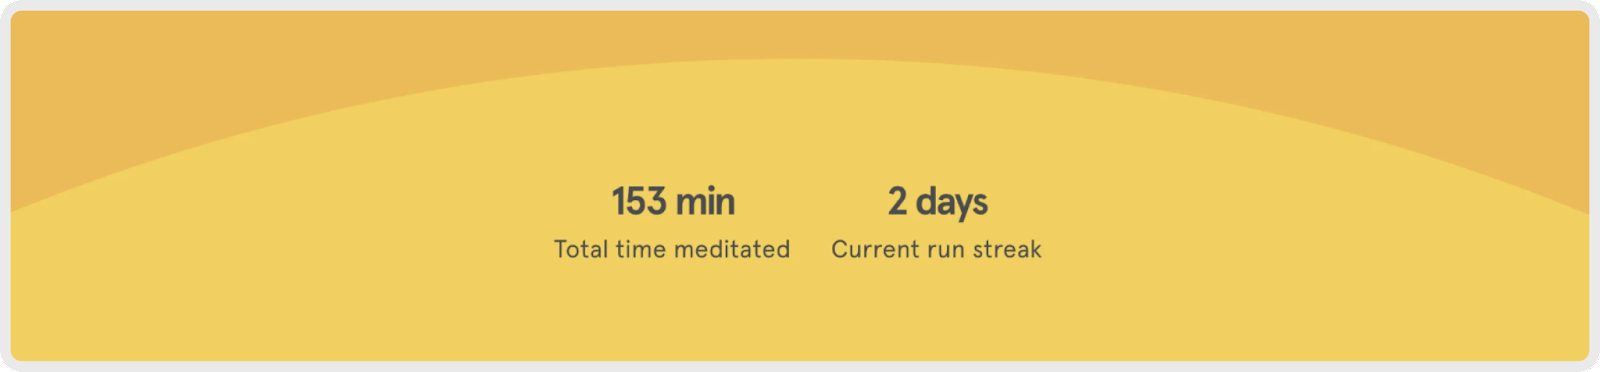 Screenshot from the Headspace app - Gamification